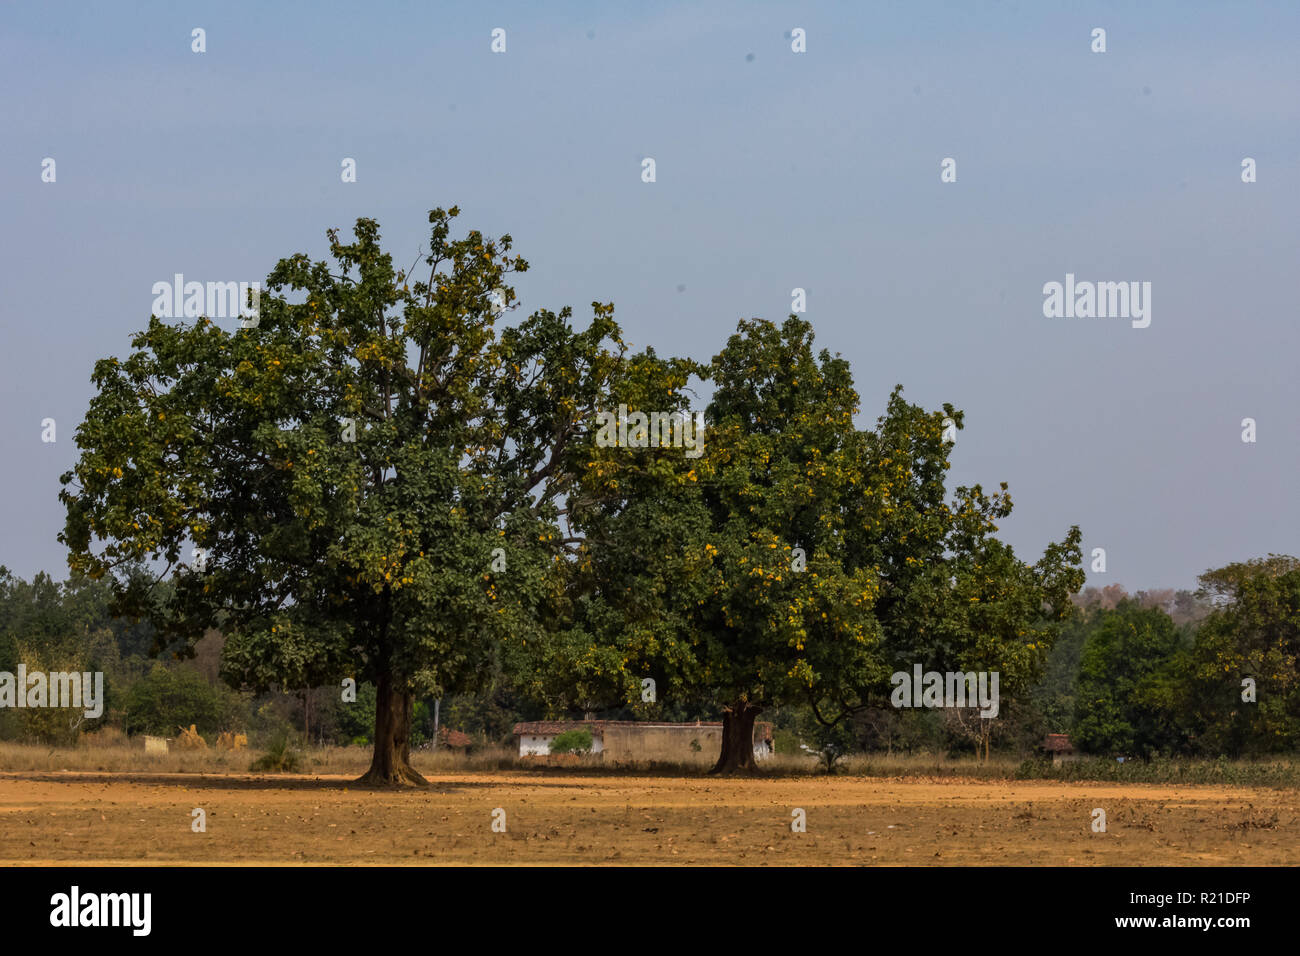 An couple of Indian tree mahuaa close view in a rural field looking awesome. Stock Photo